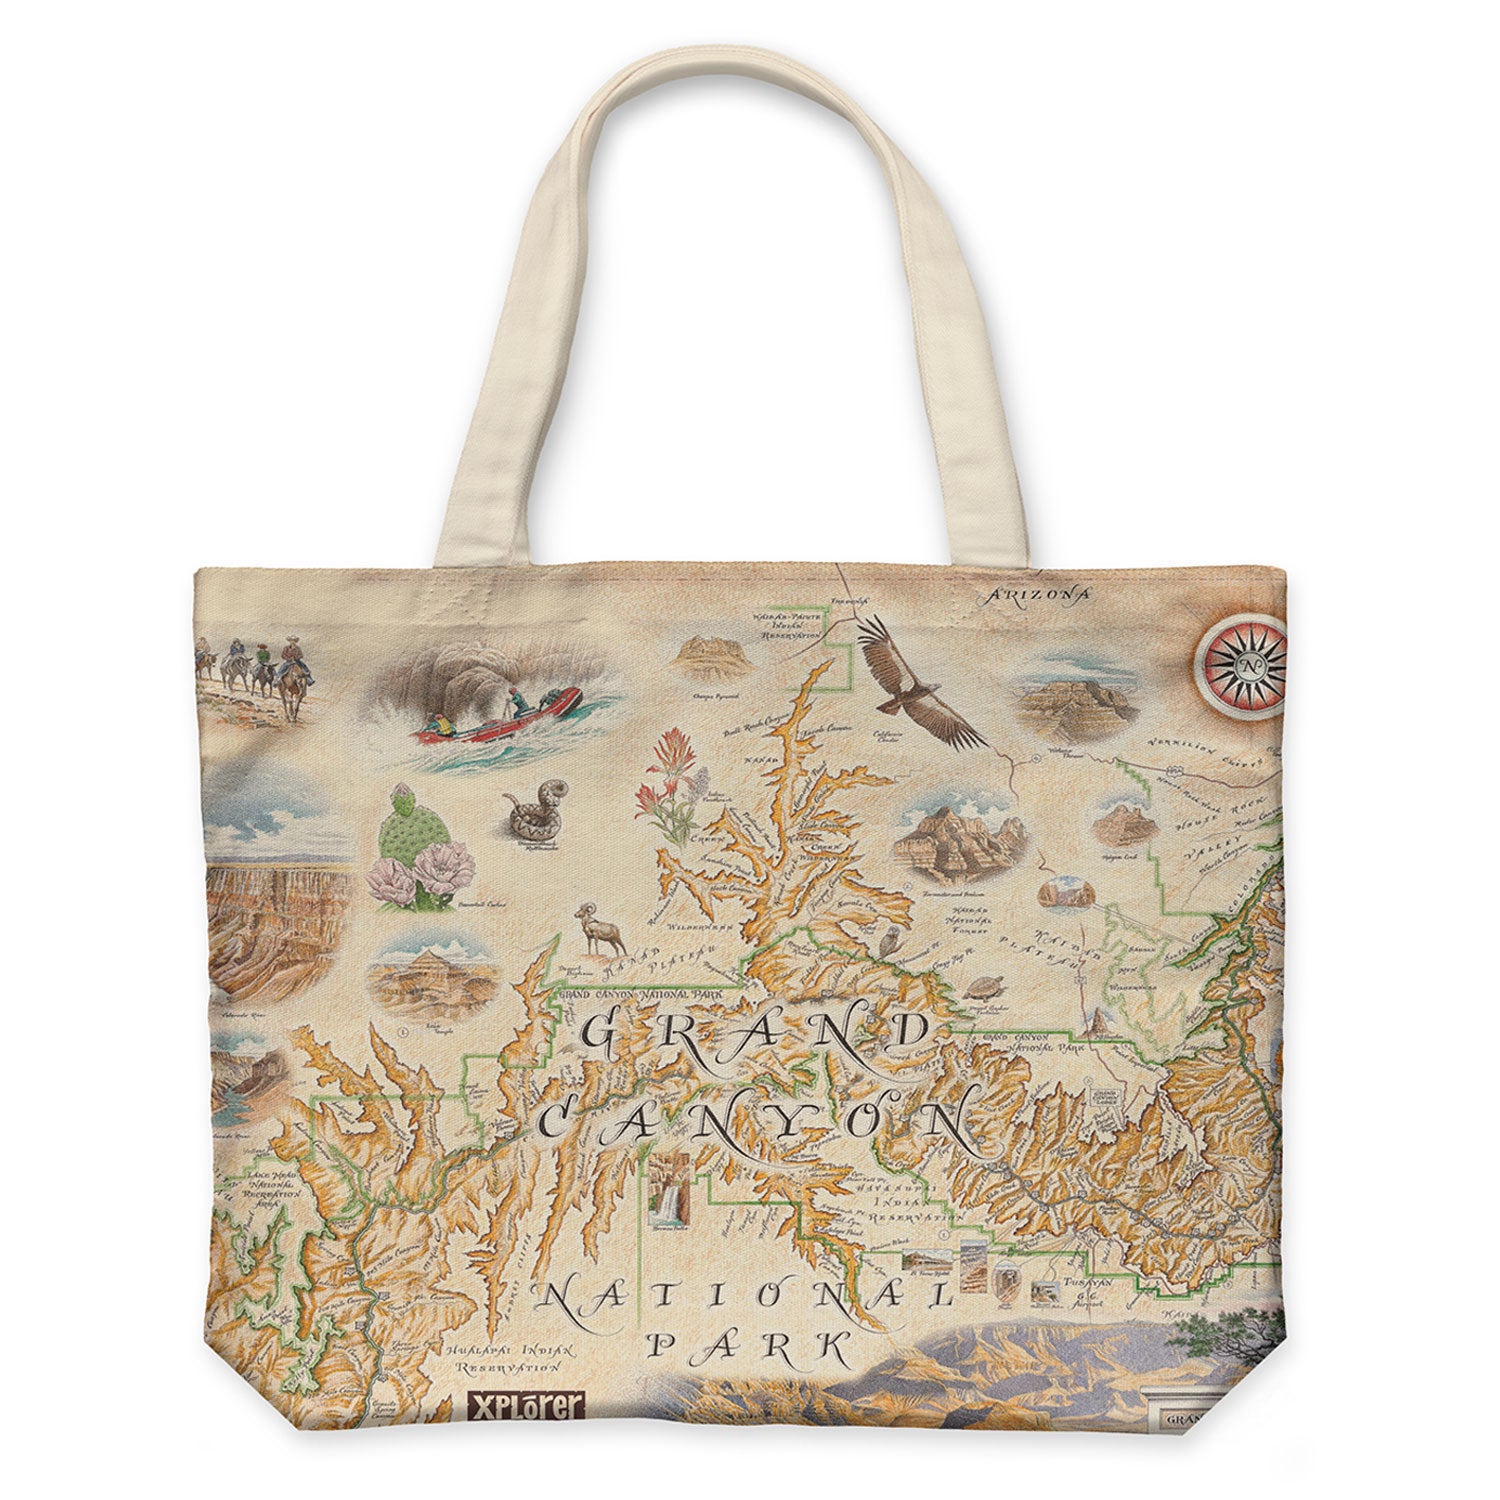 Grand Canyon National Park Tote Bags by Xplorer Maps. Features illustrations of activities like whitewater rafting and mule riding, along tortoise, California Condor, and Beavertail Cactus.